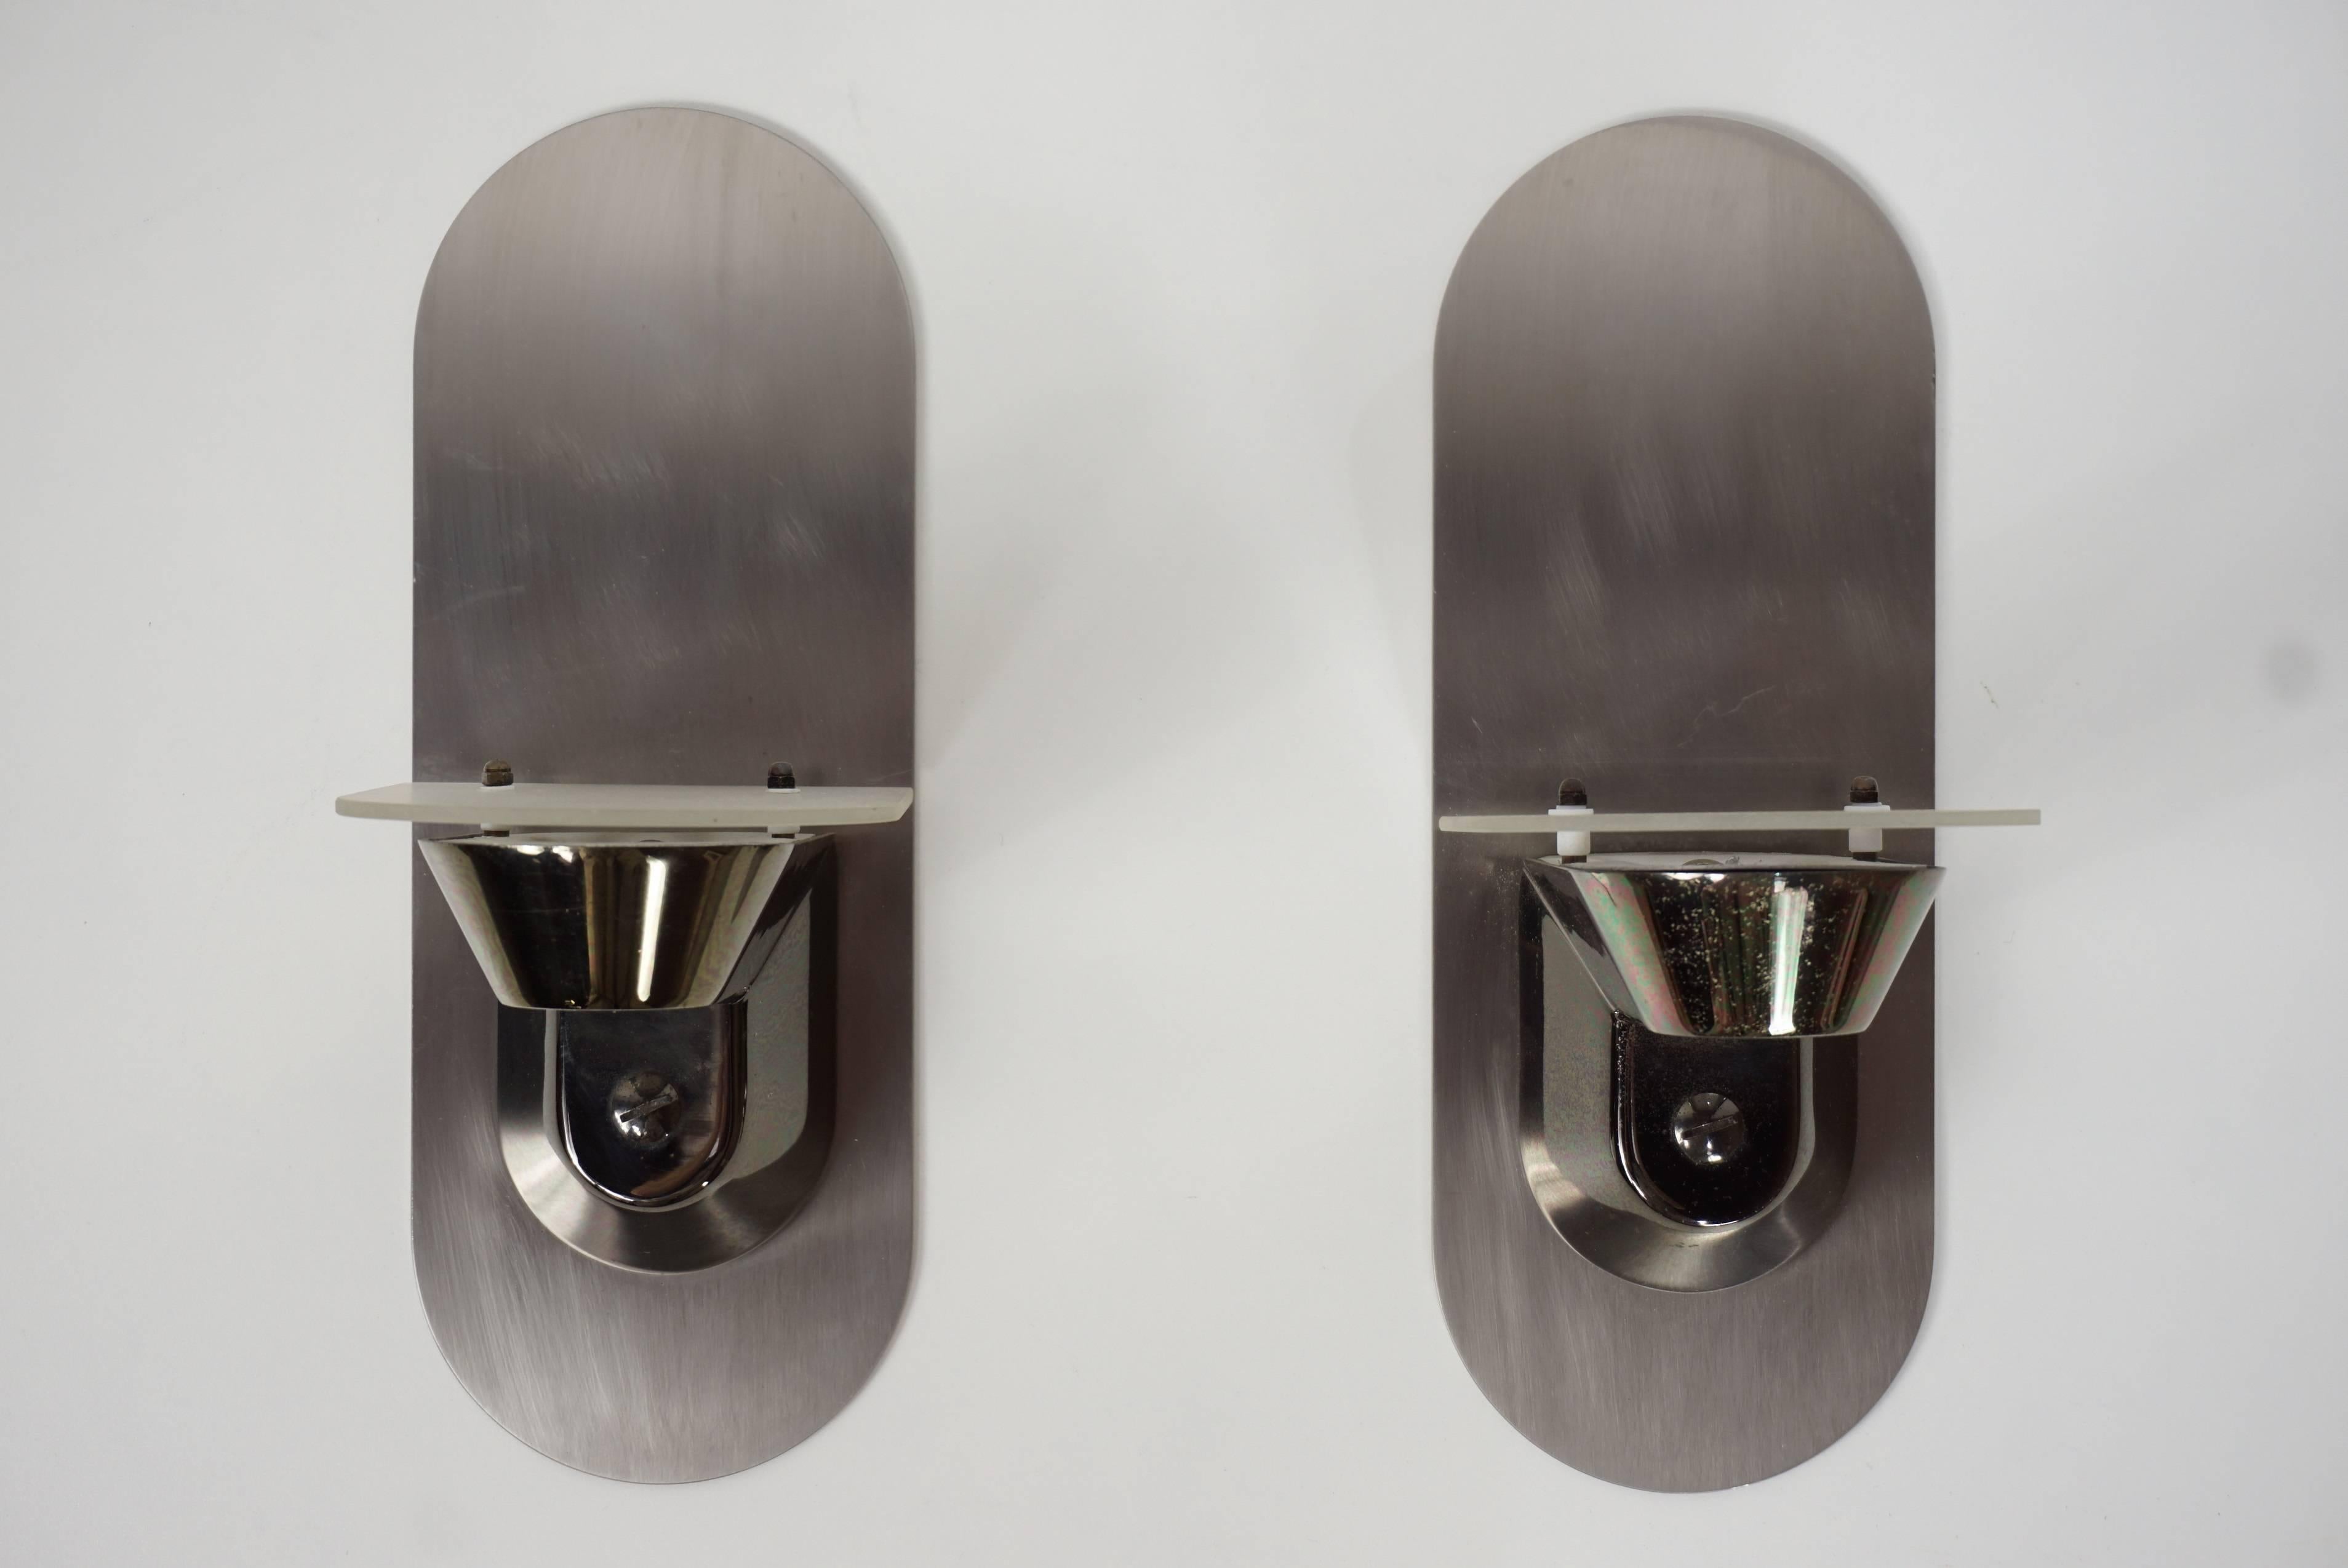 Pair of Stainless Steel and Glass Design Halogen Wall Sconces In Excellent Condition For Sale In Tourcoing, FR